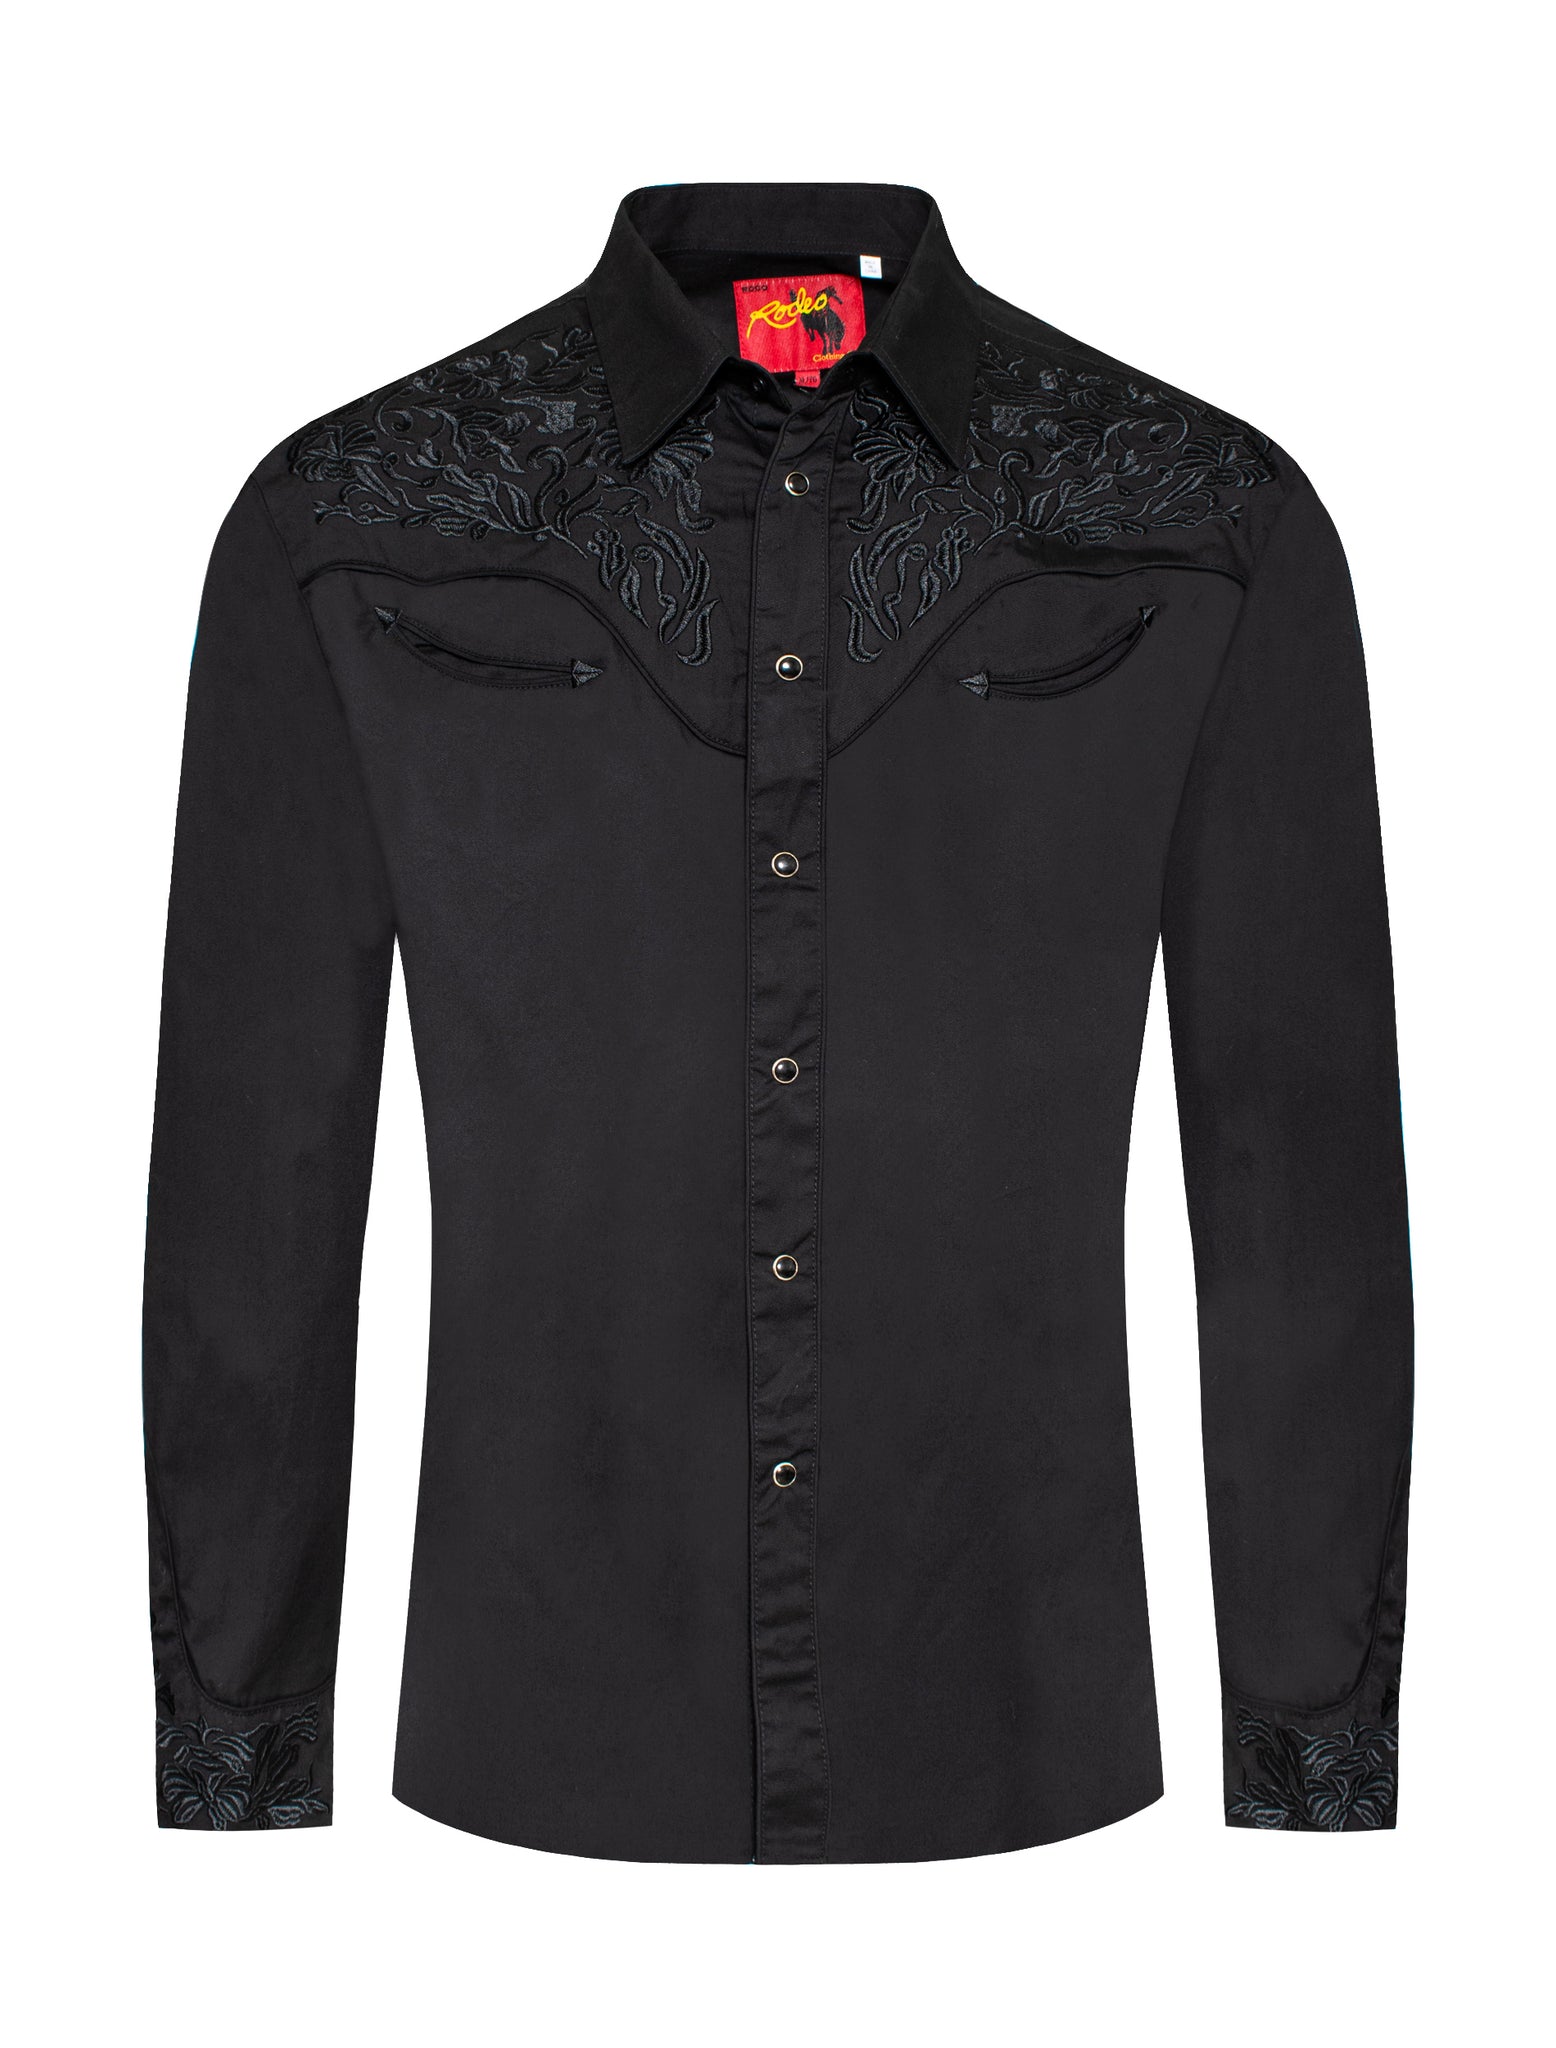 Men's Western Cowboy Embroidery Shirt -PS500L-565